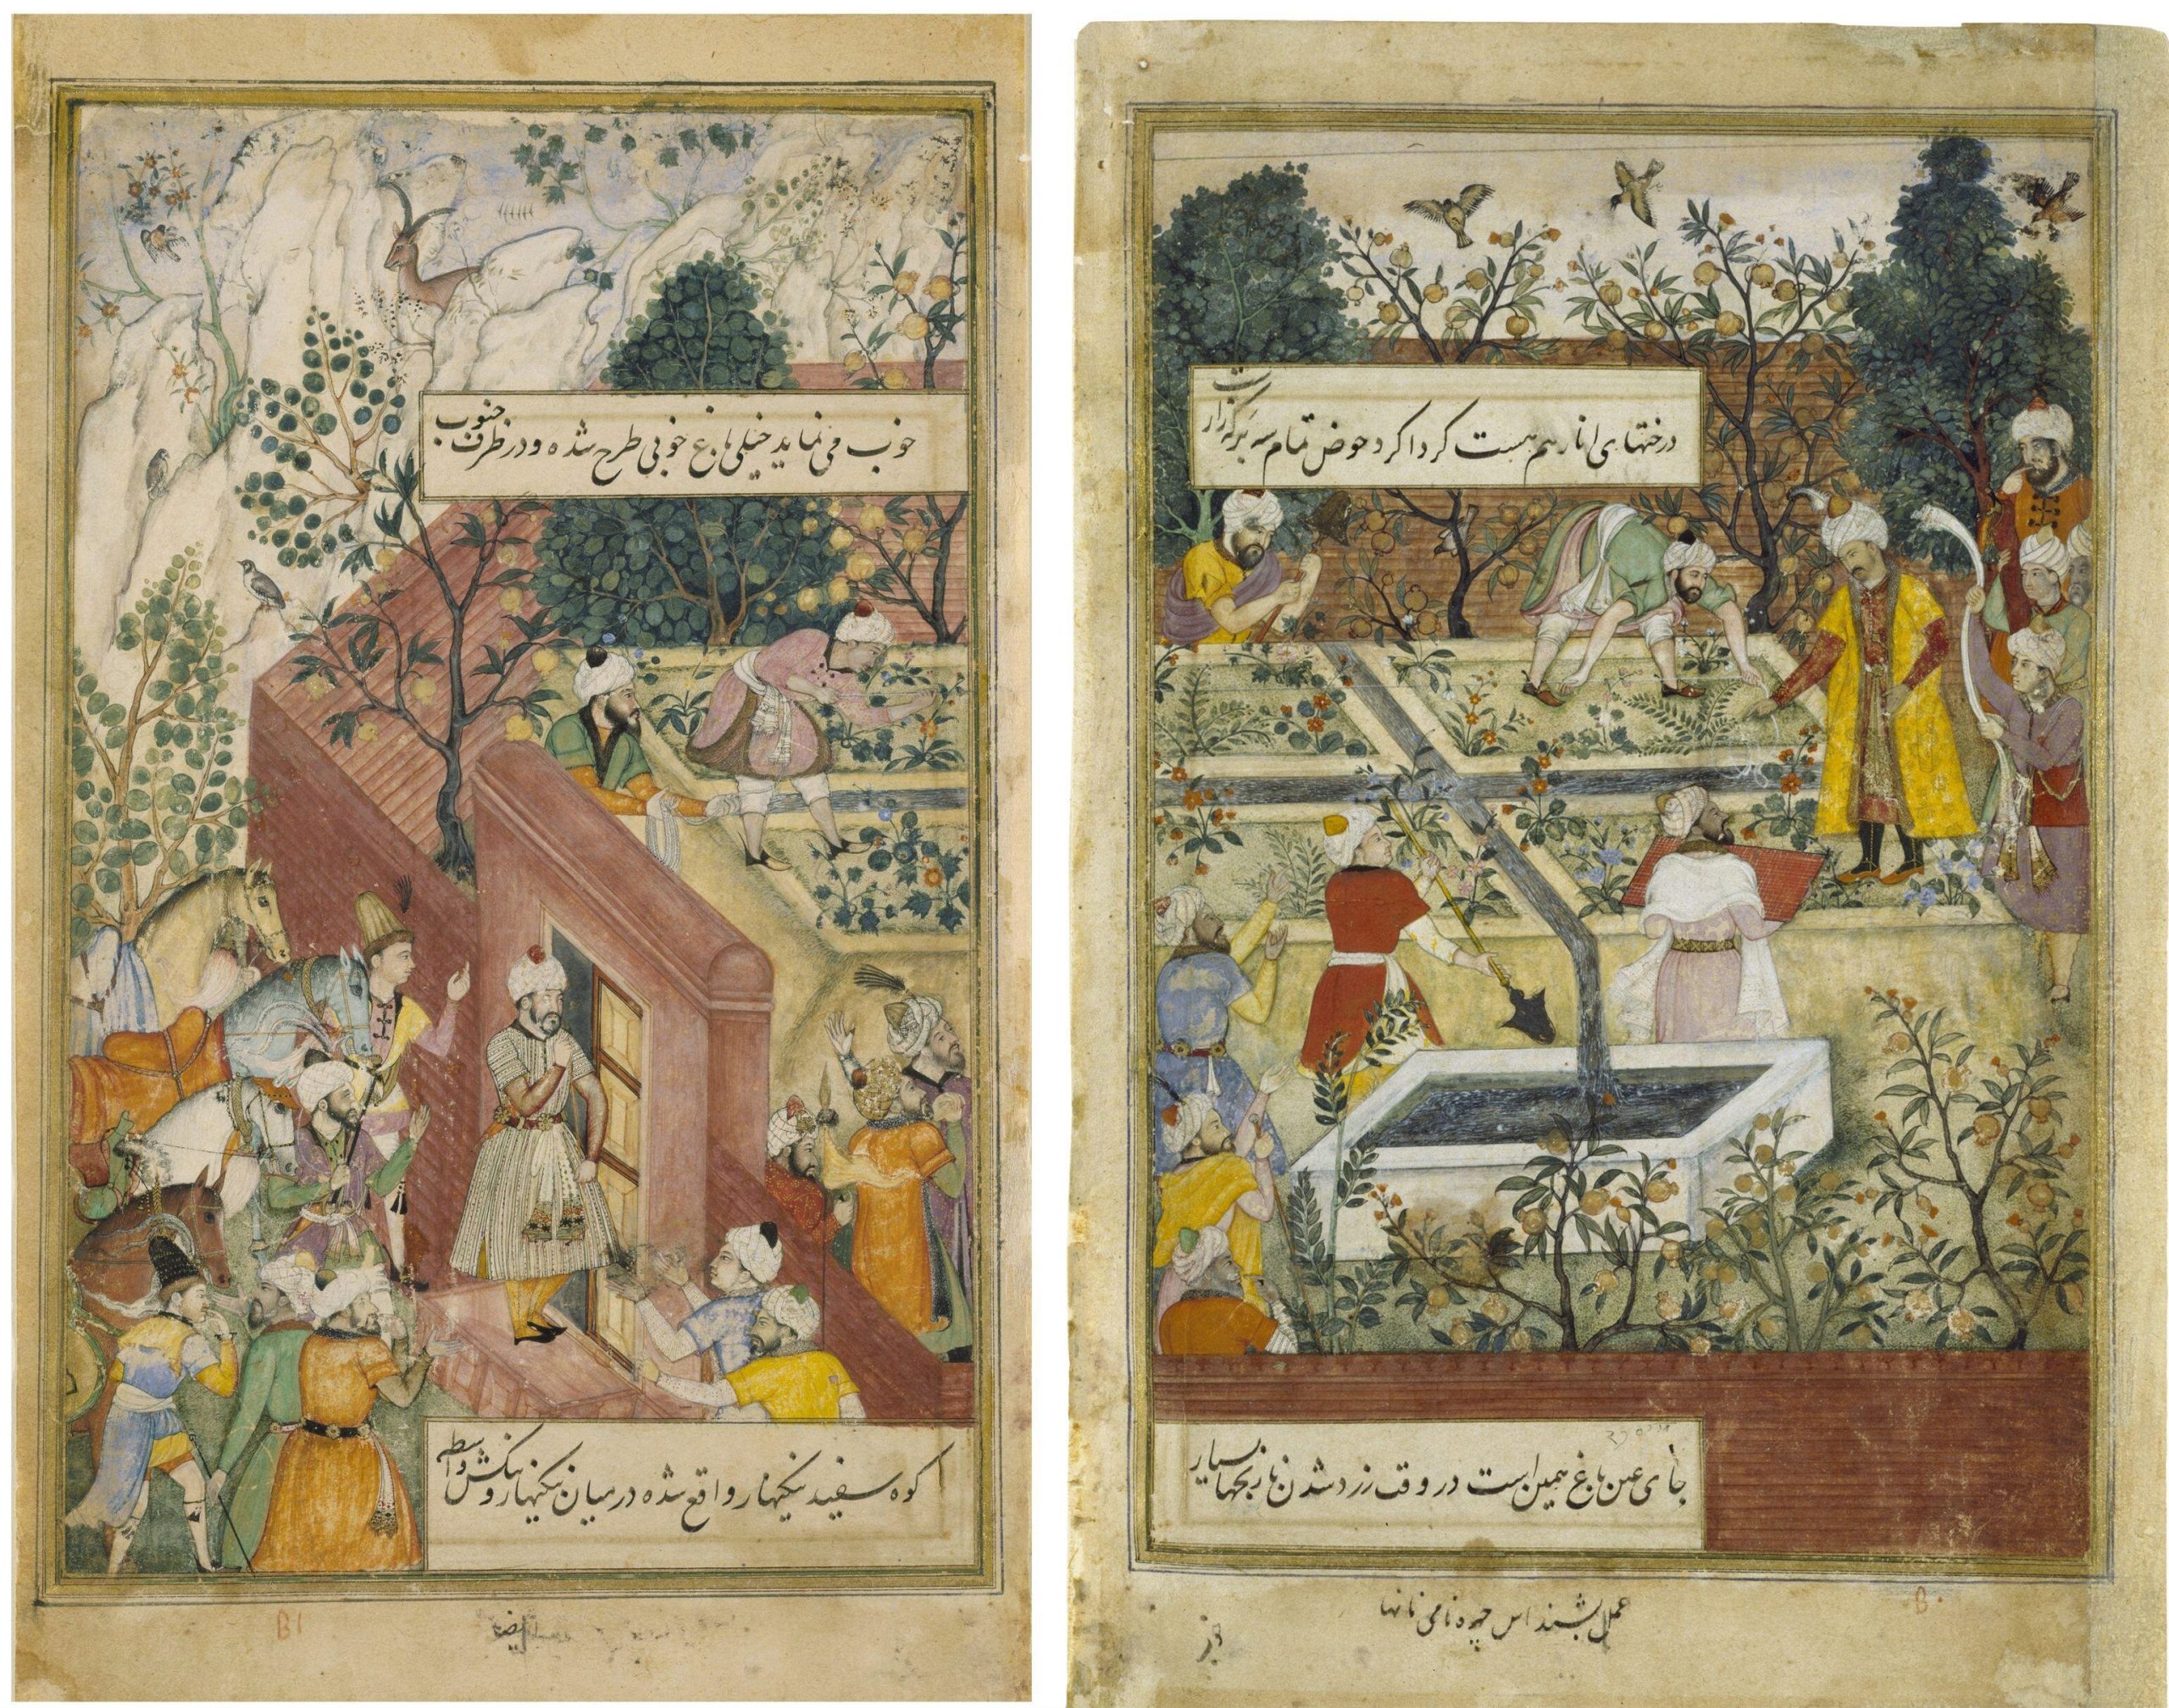 Bishndas, Babur Supervising the Laying Out of the Garden of Fidelity, ink and color on paper, ca. 1590 (Victoria and Albert Museum, London). Photo: Public Domain.